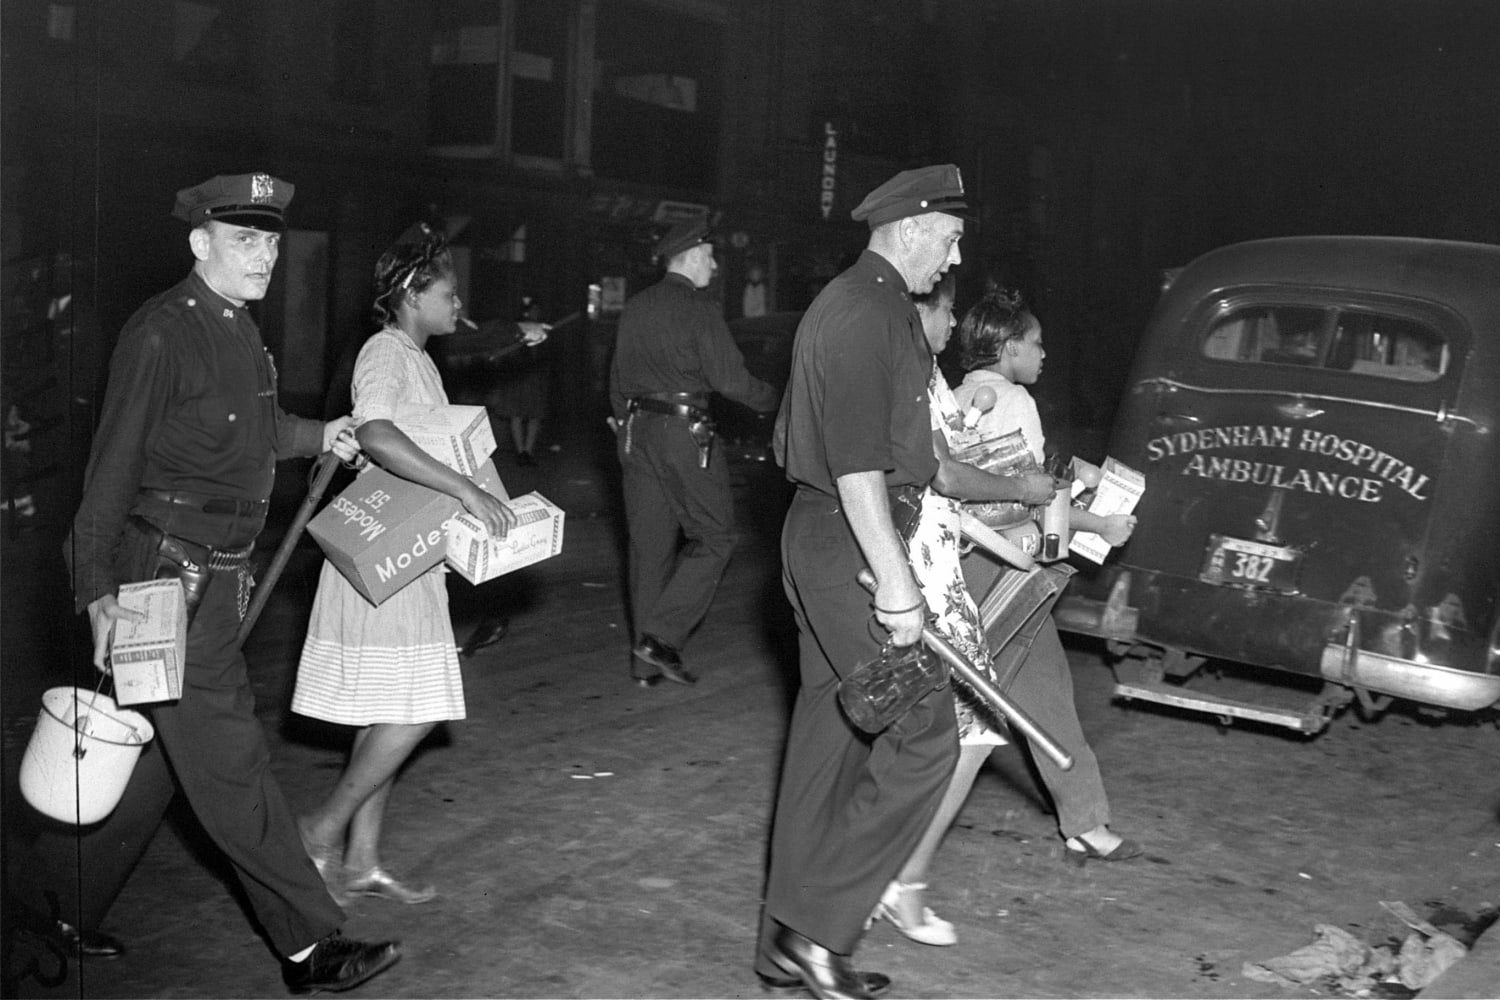 NYC protests throughout the years, in photos